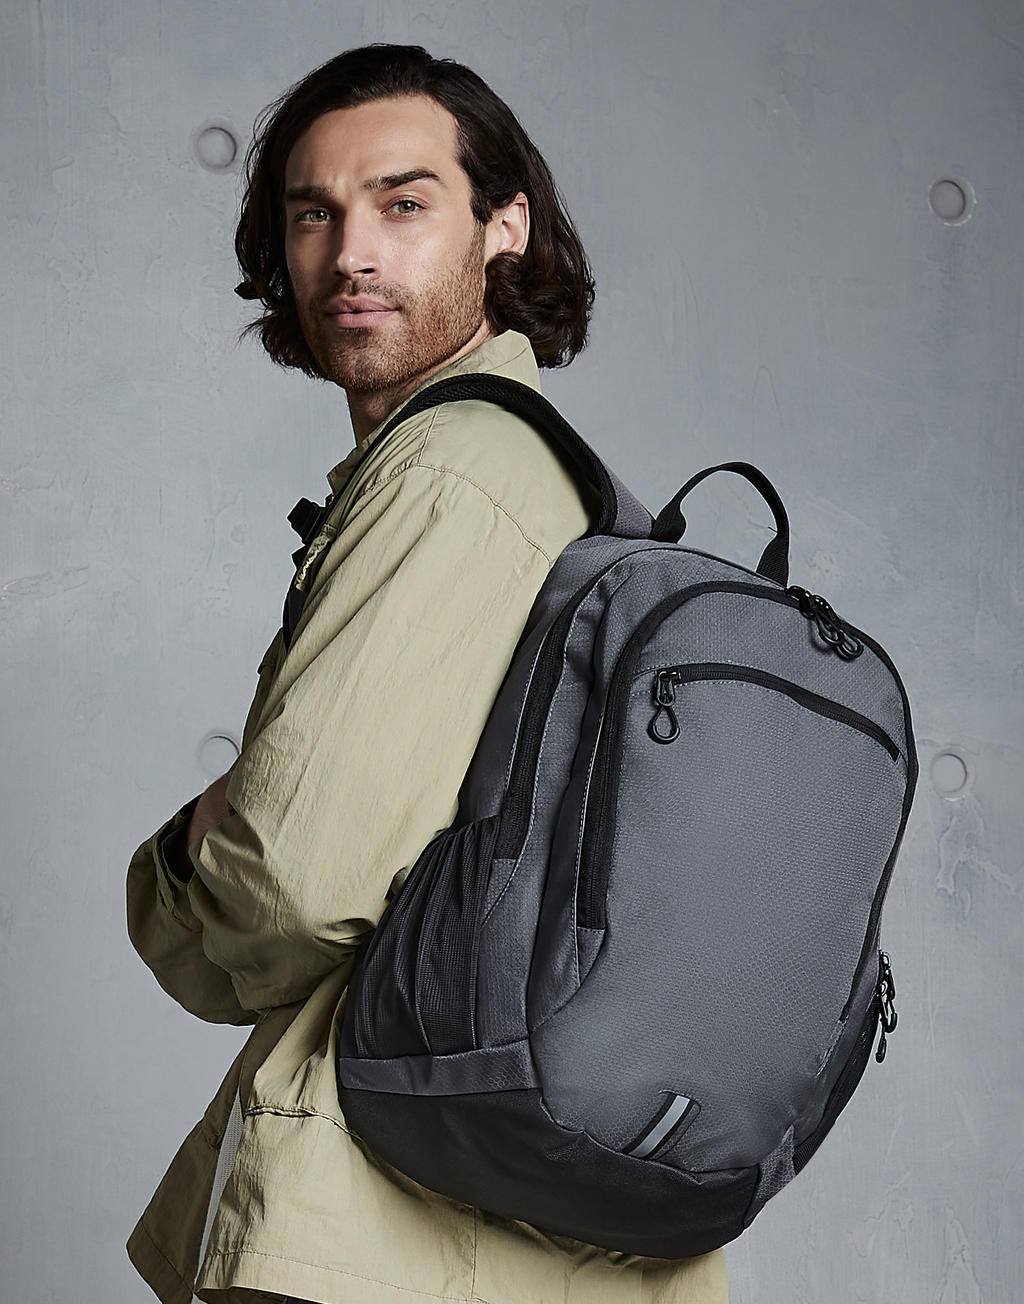  Endeavour Backpack in Farbe Jet Black 